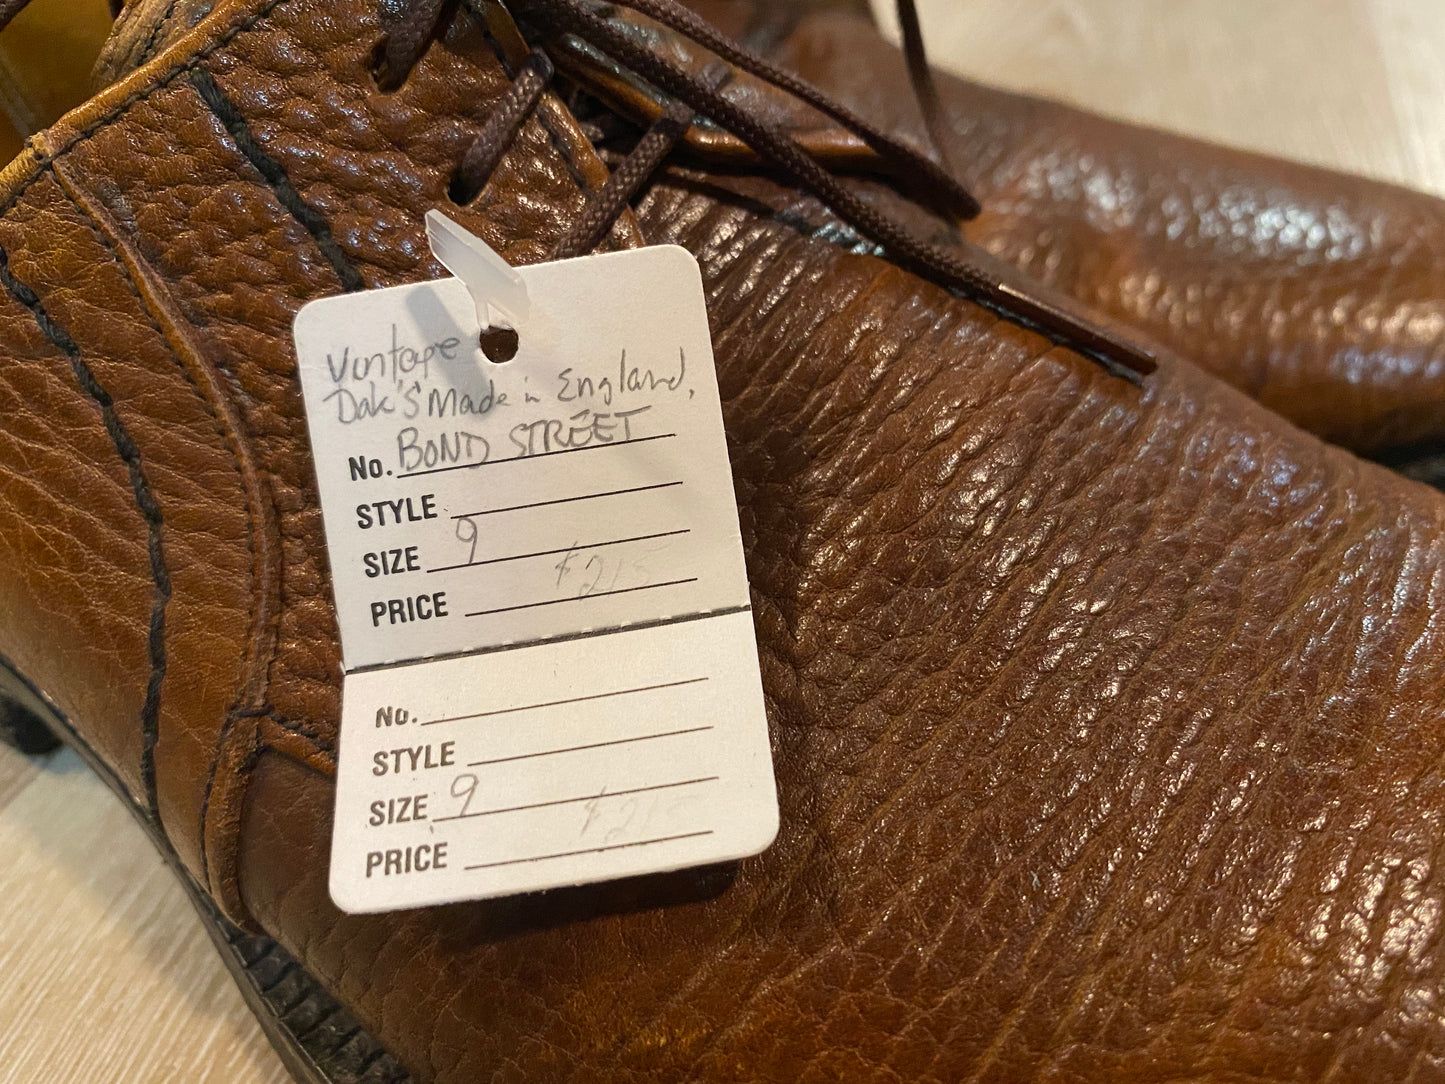 Kingspier Vintage - Brown Plain Toe Derbies by Dack’s The Bondstreet Shoe - Sizes: 9M 11W 42EURO, Made in England, Leather Soles and Insoles, Phillips Cushion No Mark Heels